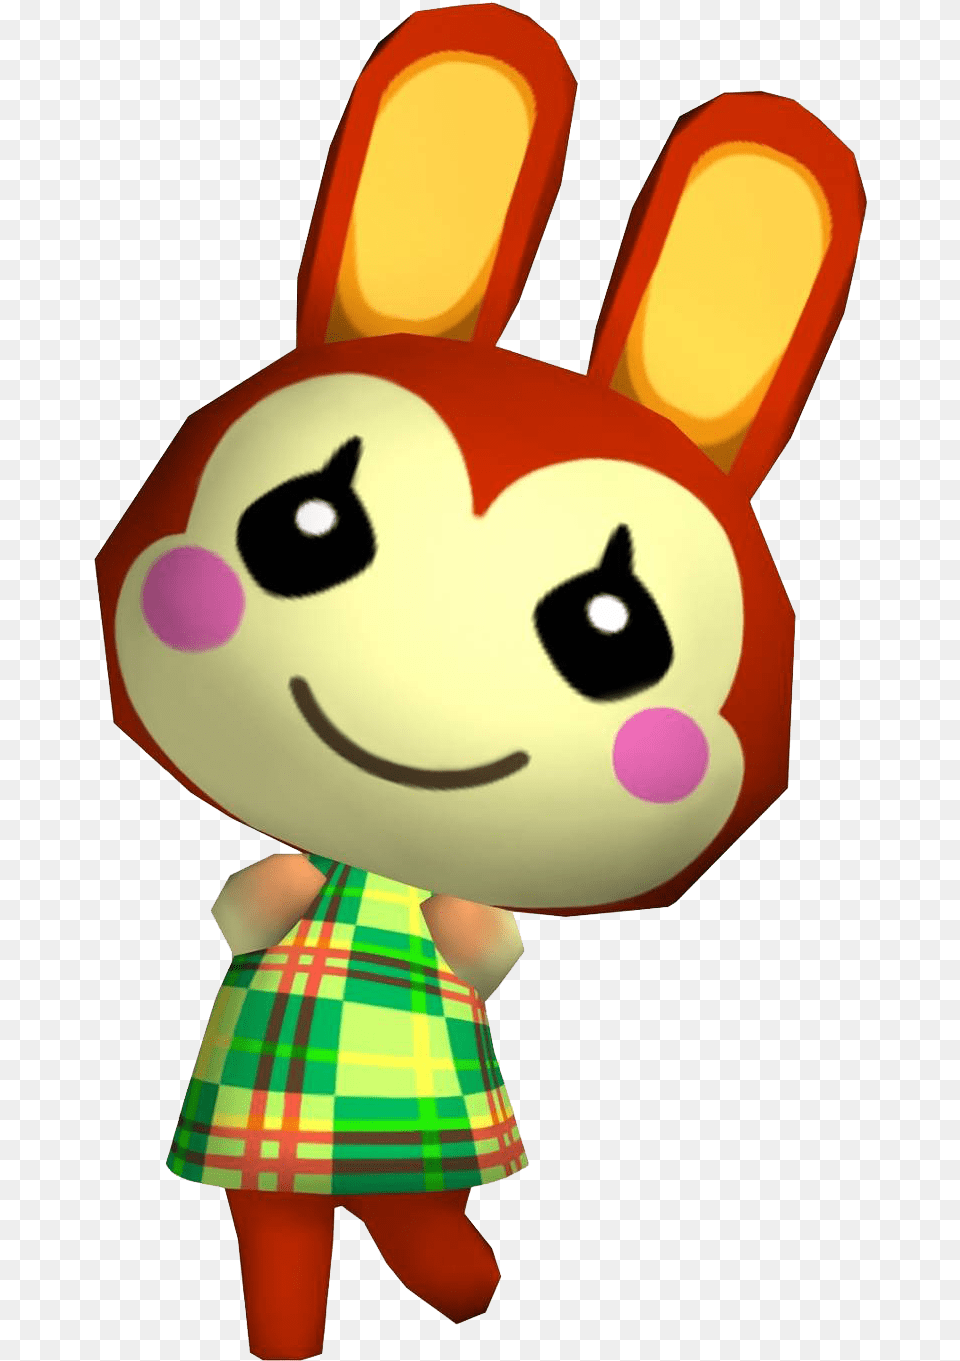 Album Cover Clipart Animal Crossing Bunnie Animal Crossing Pocket Camp, Toy, Plush, Skirt, Clothing Free Transparent Png